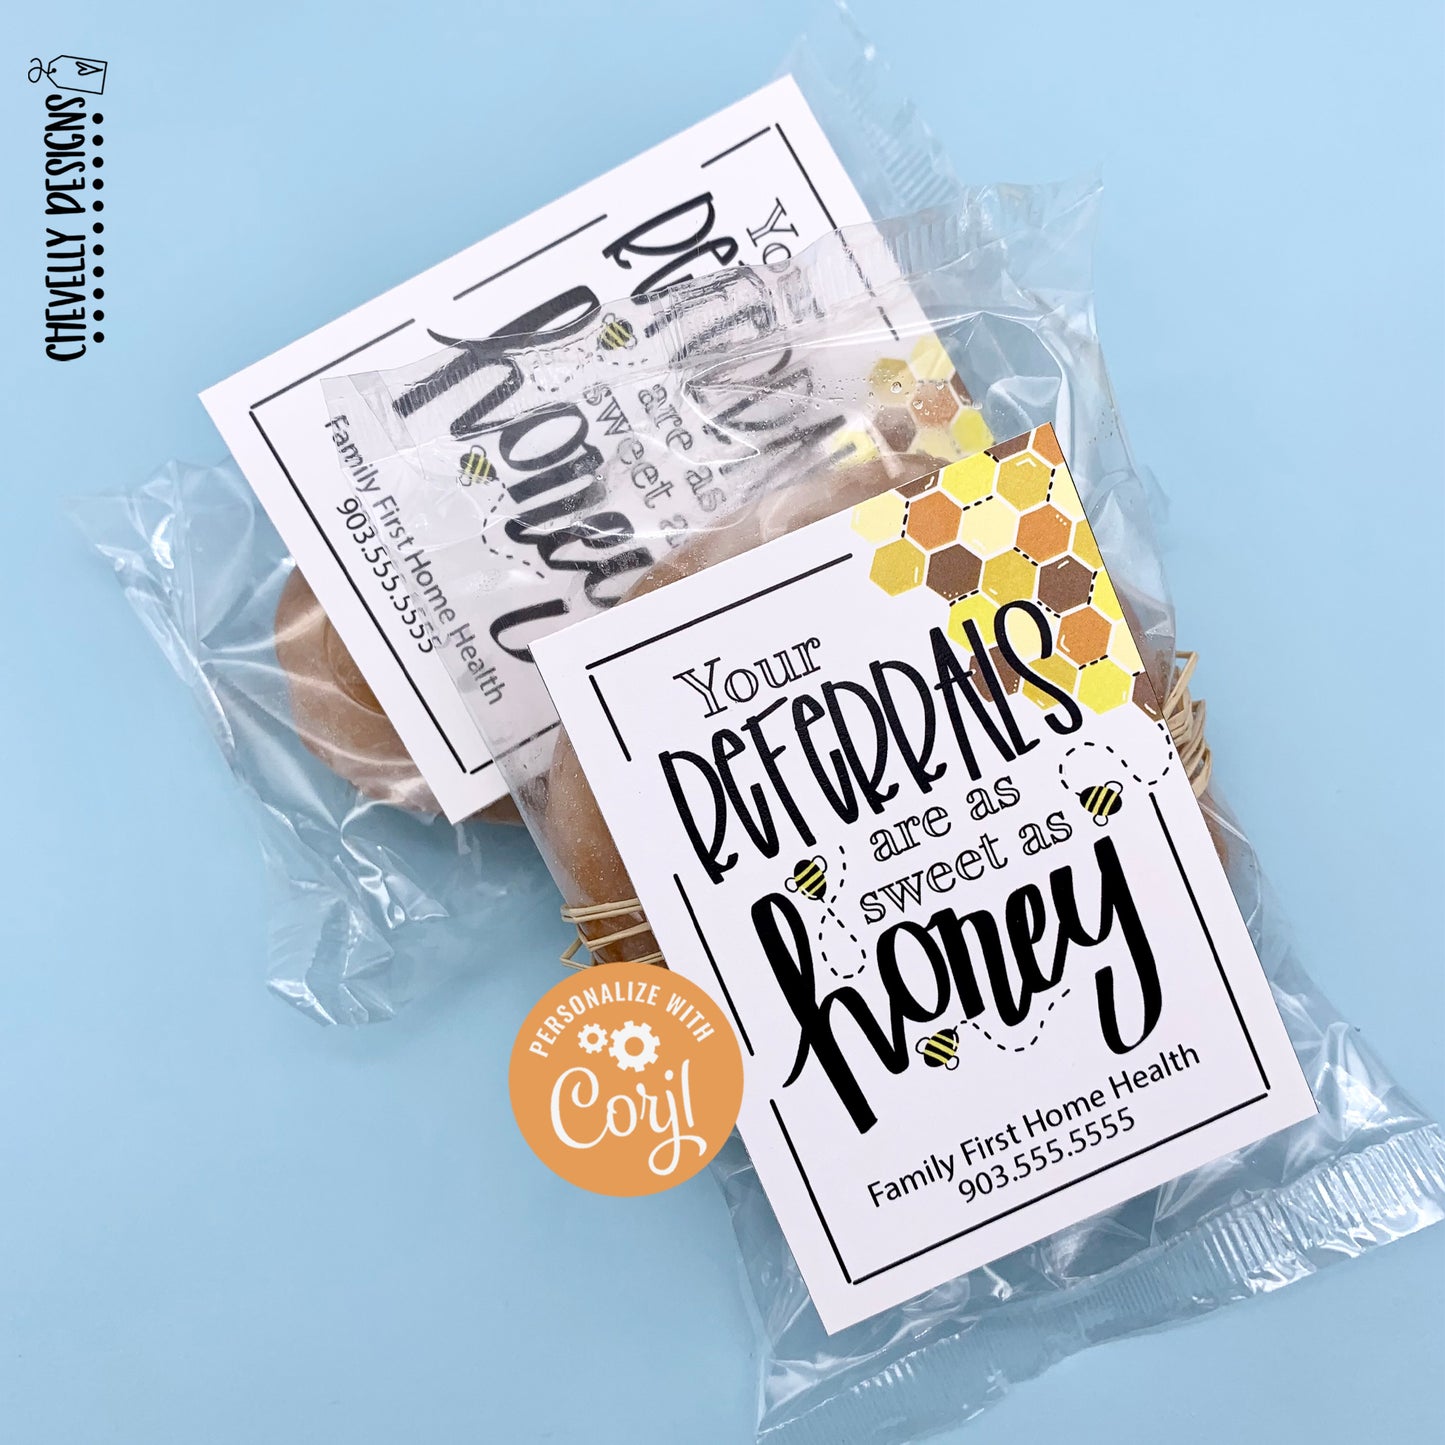 Editable - Your Referrals are as Sweet as Honey - Gift Tags for Business Marketing - Printable Digital File